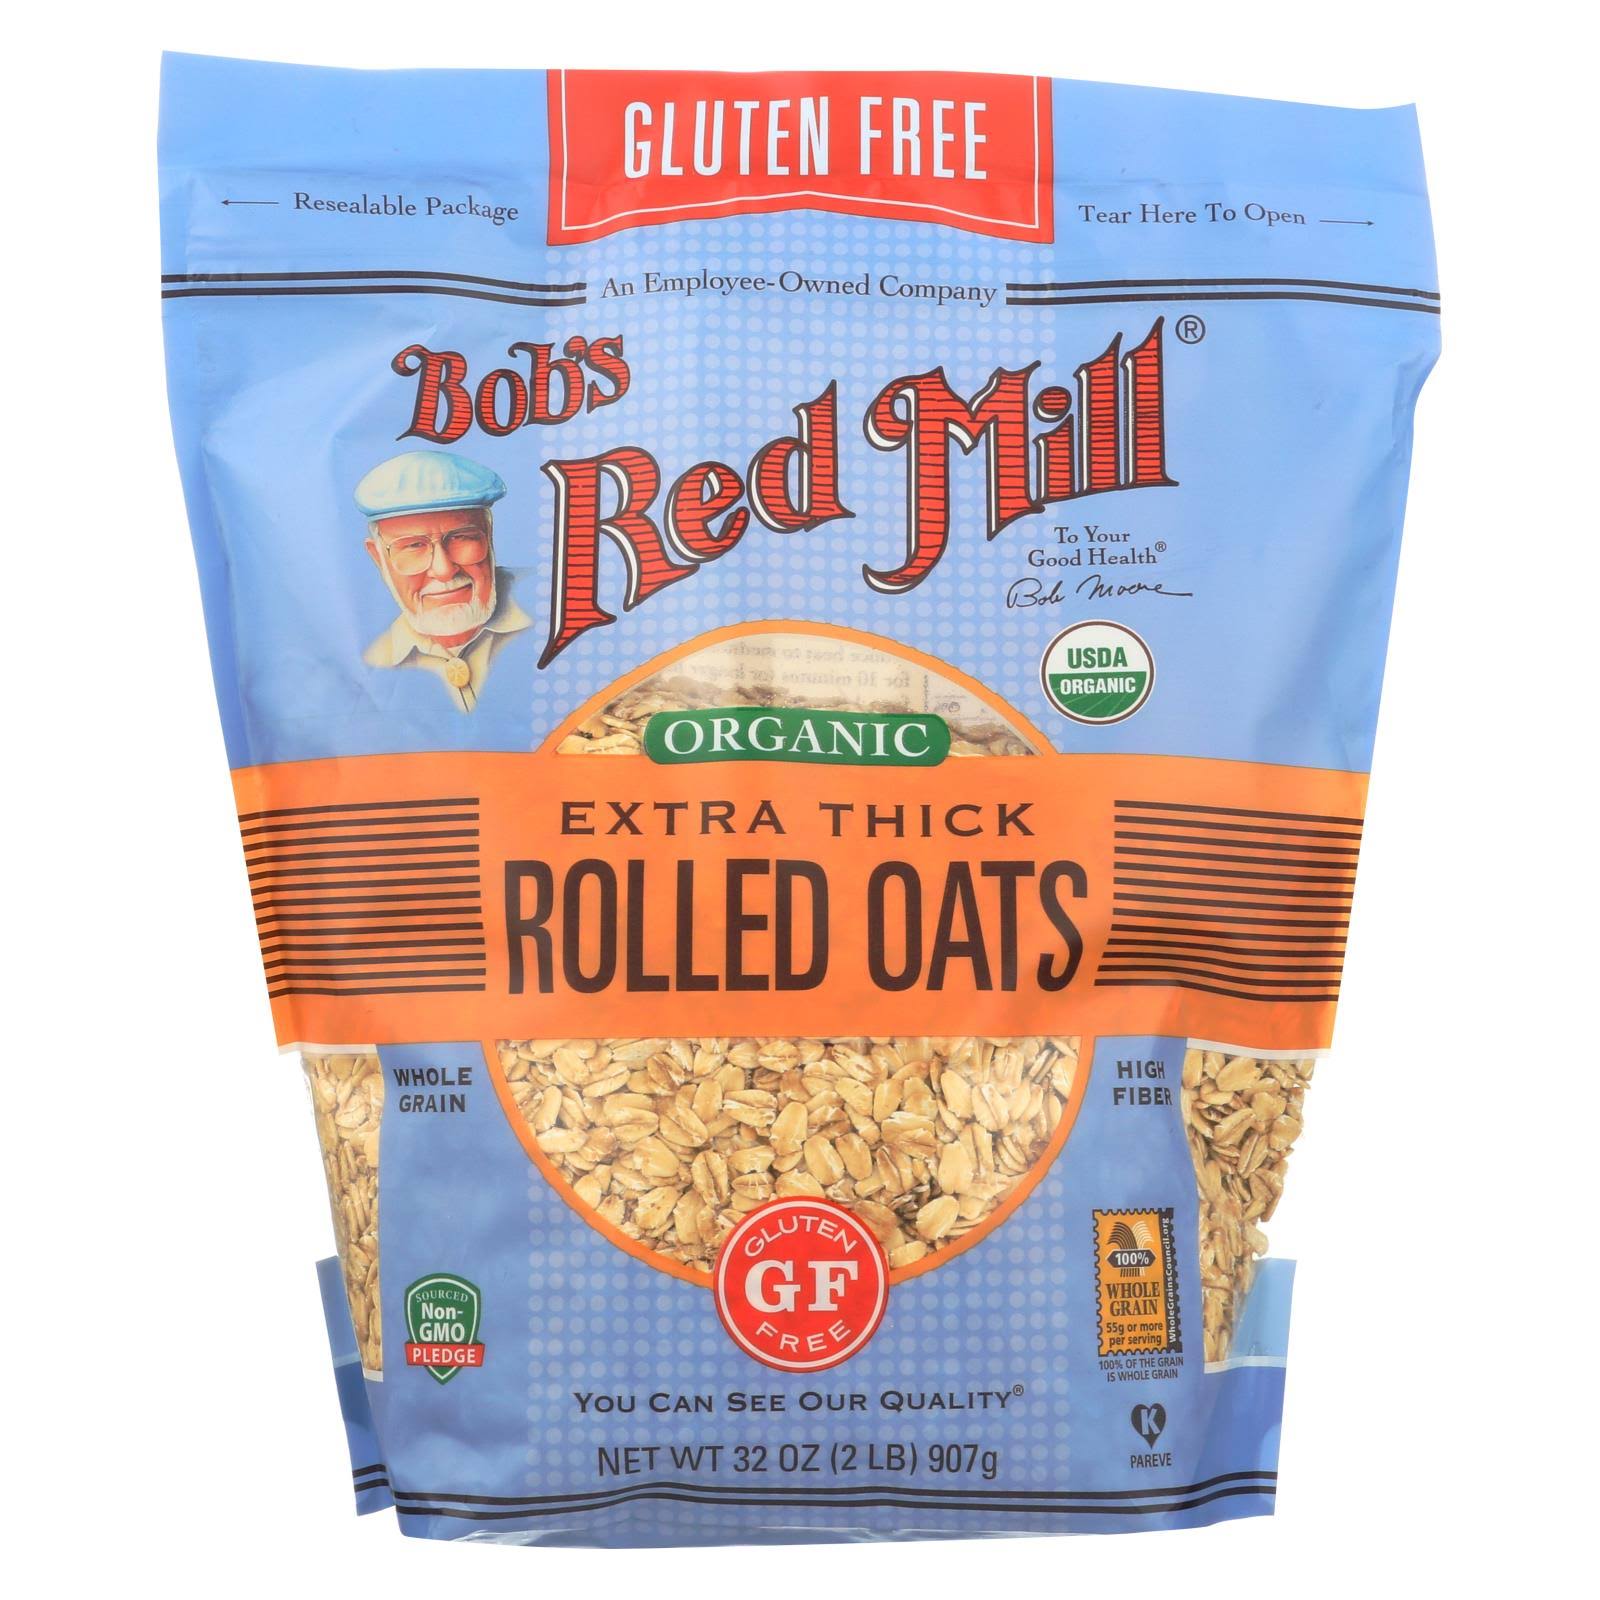 Bob's Red Mill Gluten Free Organic Thick Rolled Oats, 32 Oz